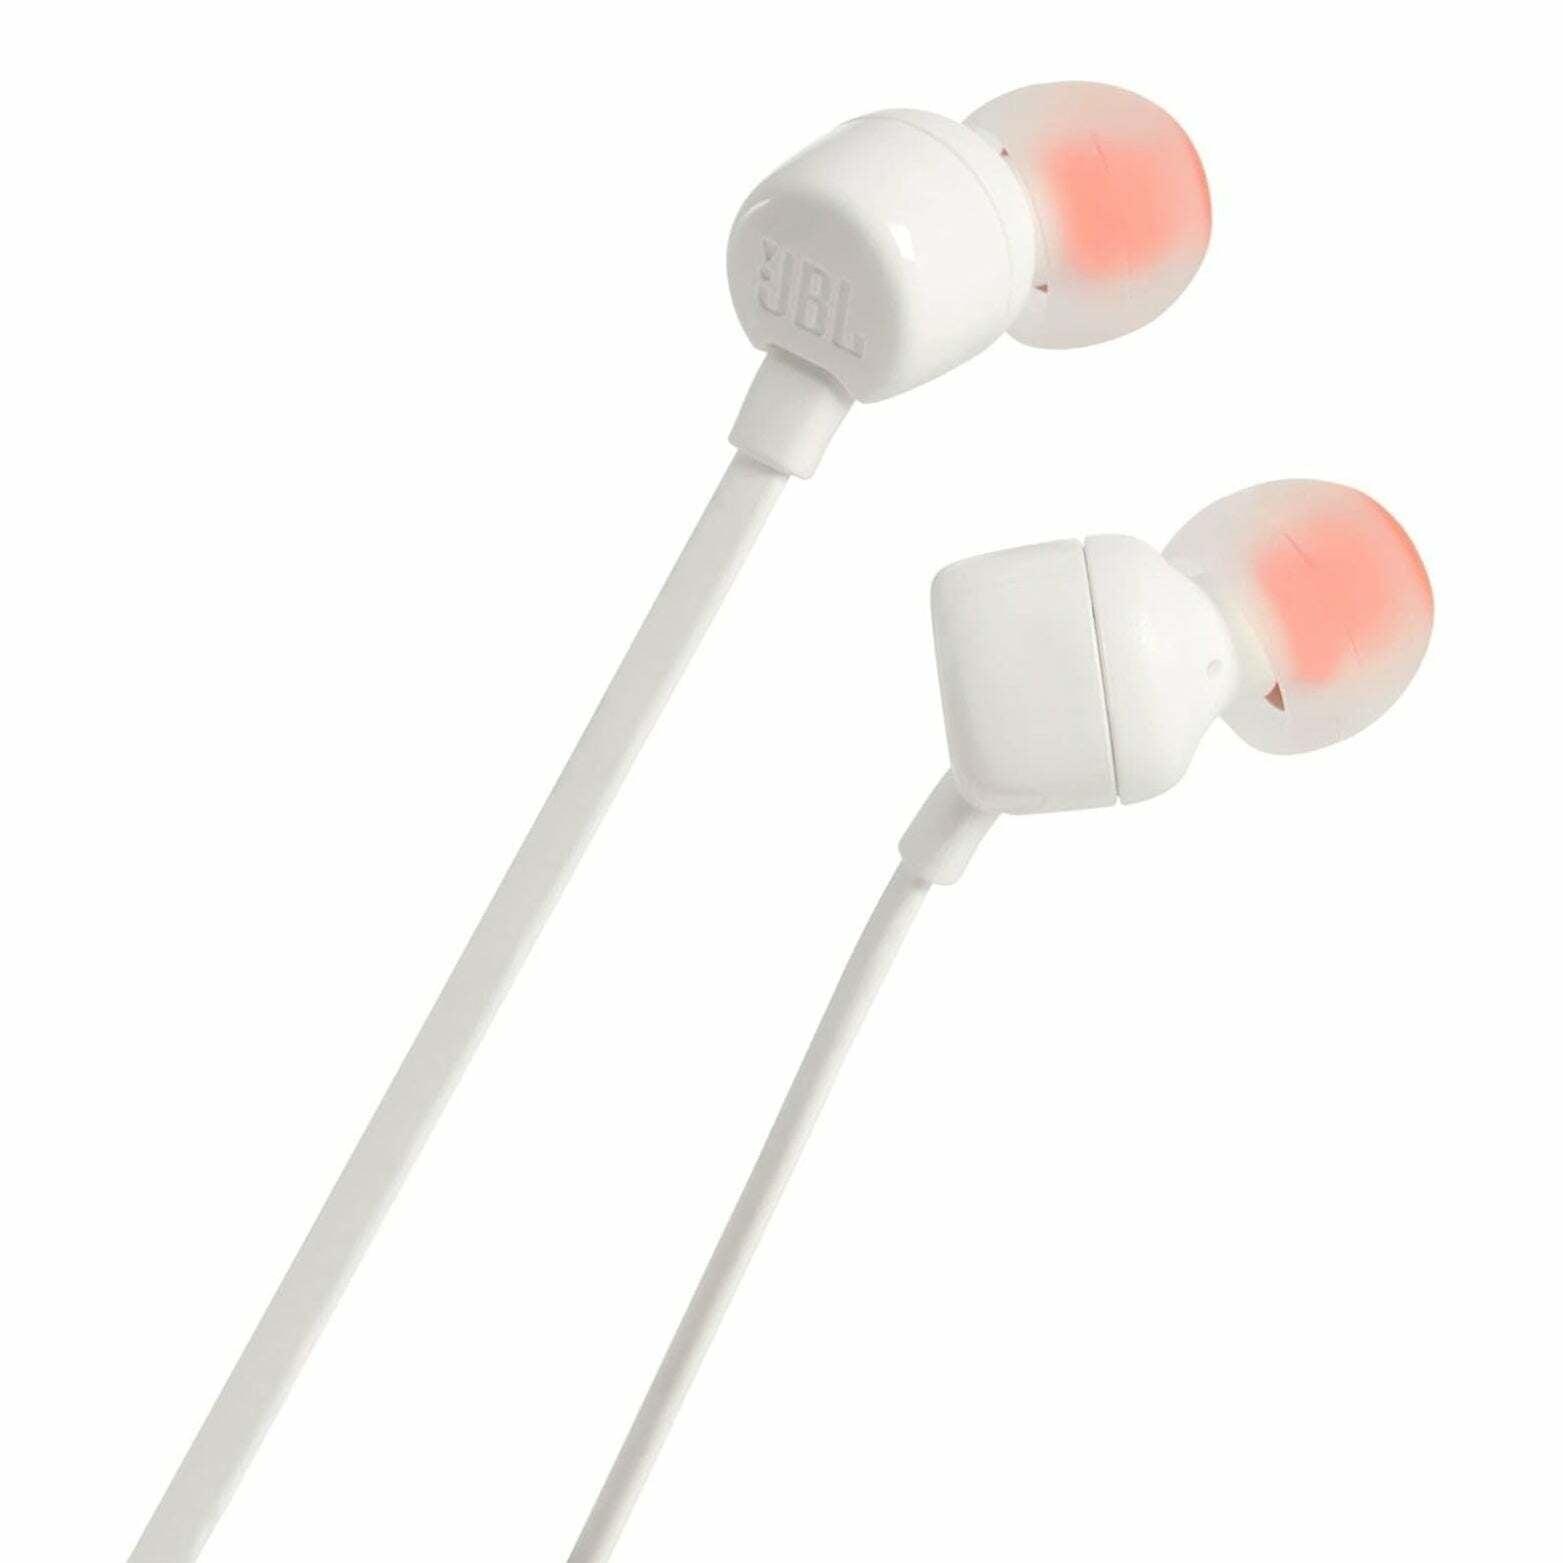 JBL Tune 110 In-Ear Wired Headphones 3.5 mm with Mic, White